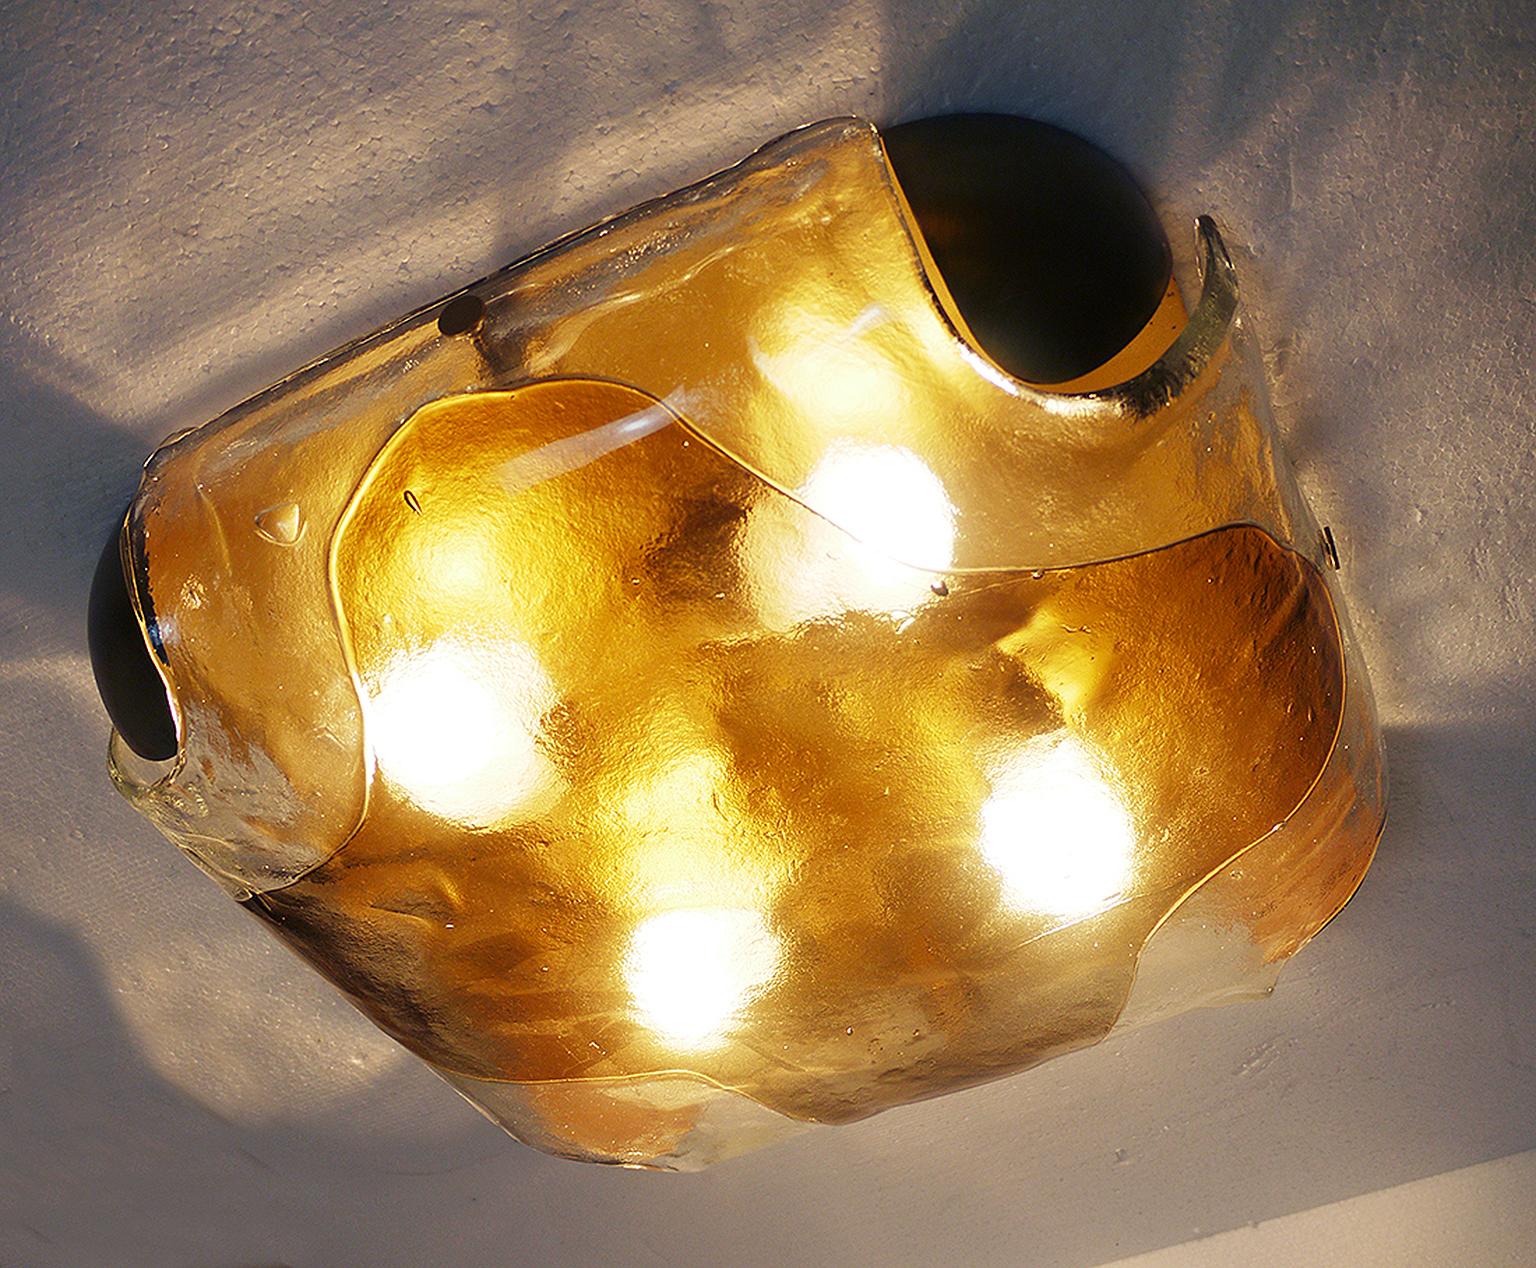 Elegant flush mount ceiling light executed in Murano glass on a brass frame with wooden finals. Made in the 1960s by Kaiser Leuchten, Germany. 

Lighting: takes four large Edison base screw bulbs. 
Condition: excellent vintage condition. No